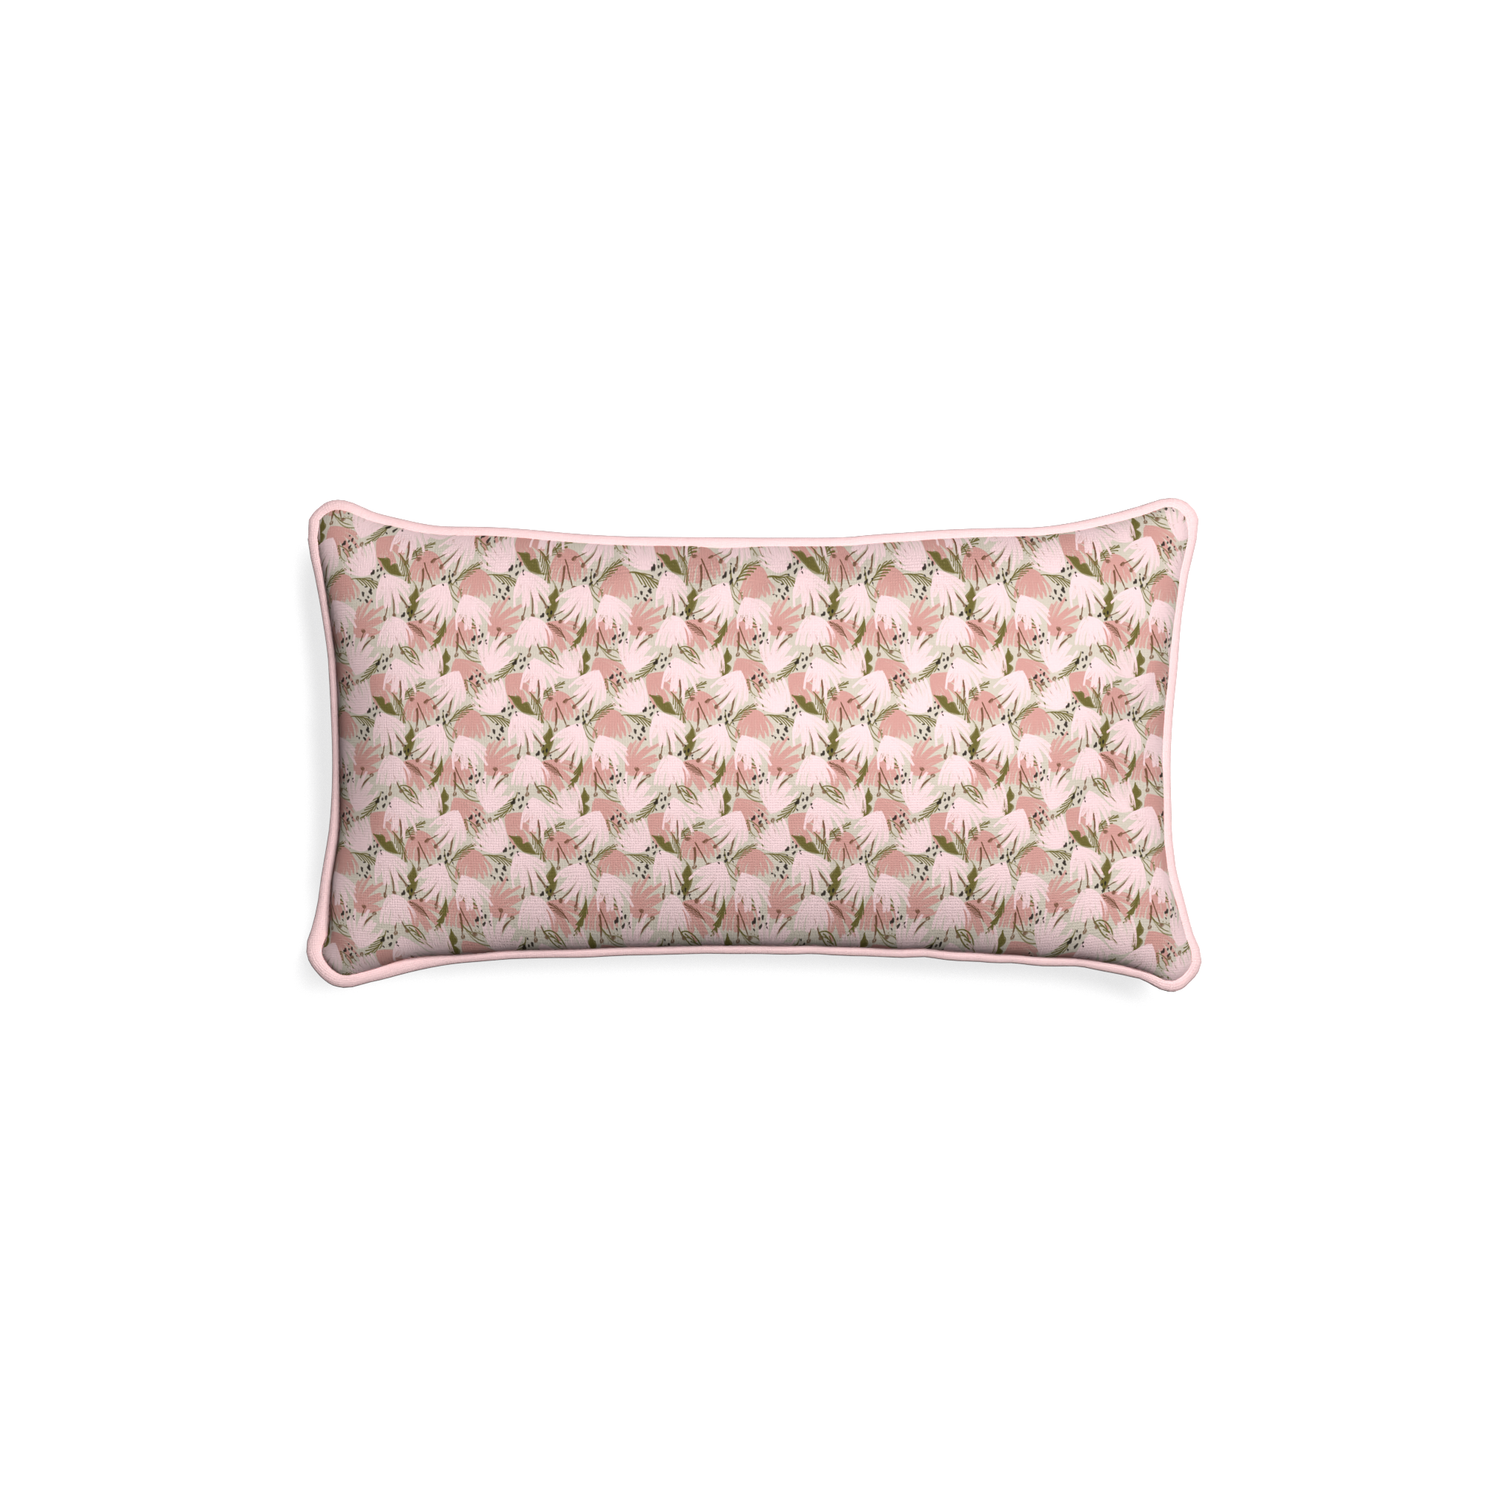 Petite-lumbar eden pink custom pink floralpillow with petal piping on white background